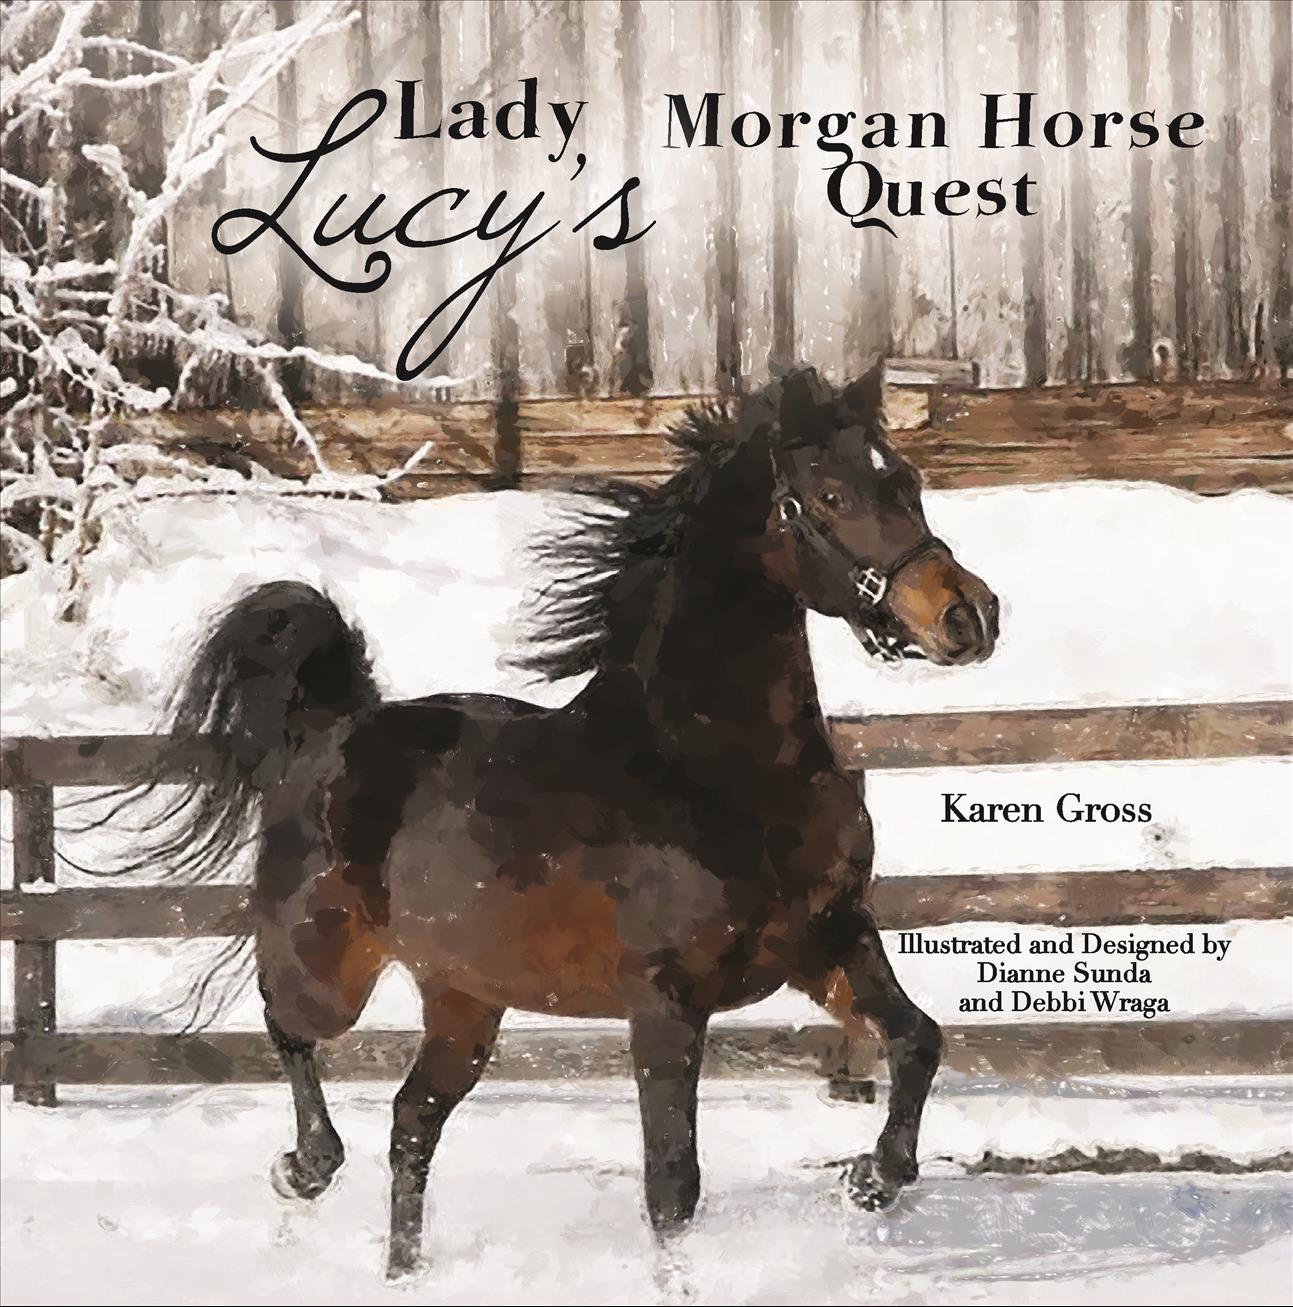 Lady Lucy's Morgan Horse Quest is Latest in Author's Trauma-Sensitive Children's Book Series